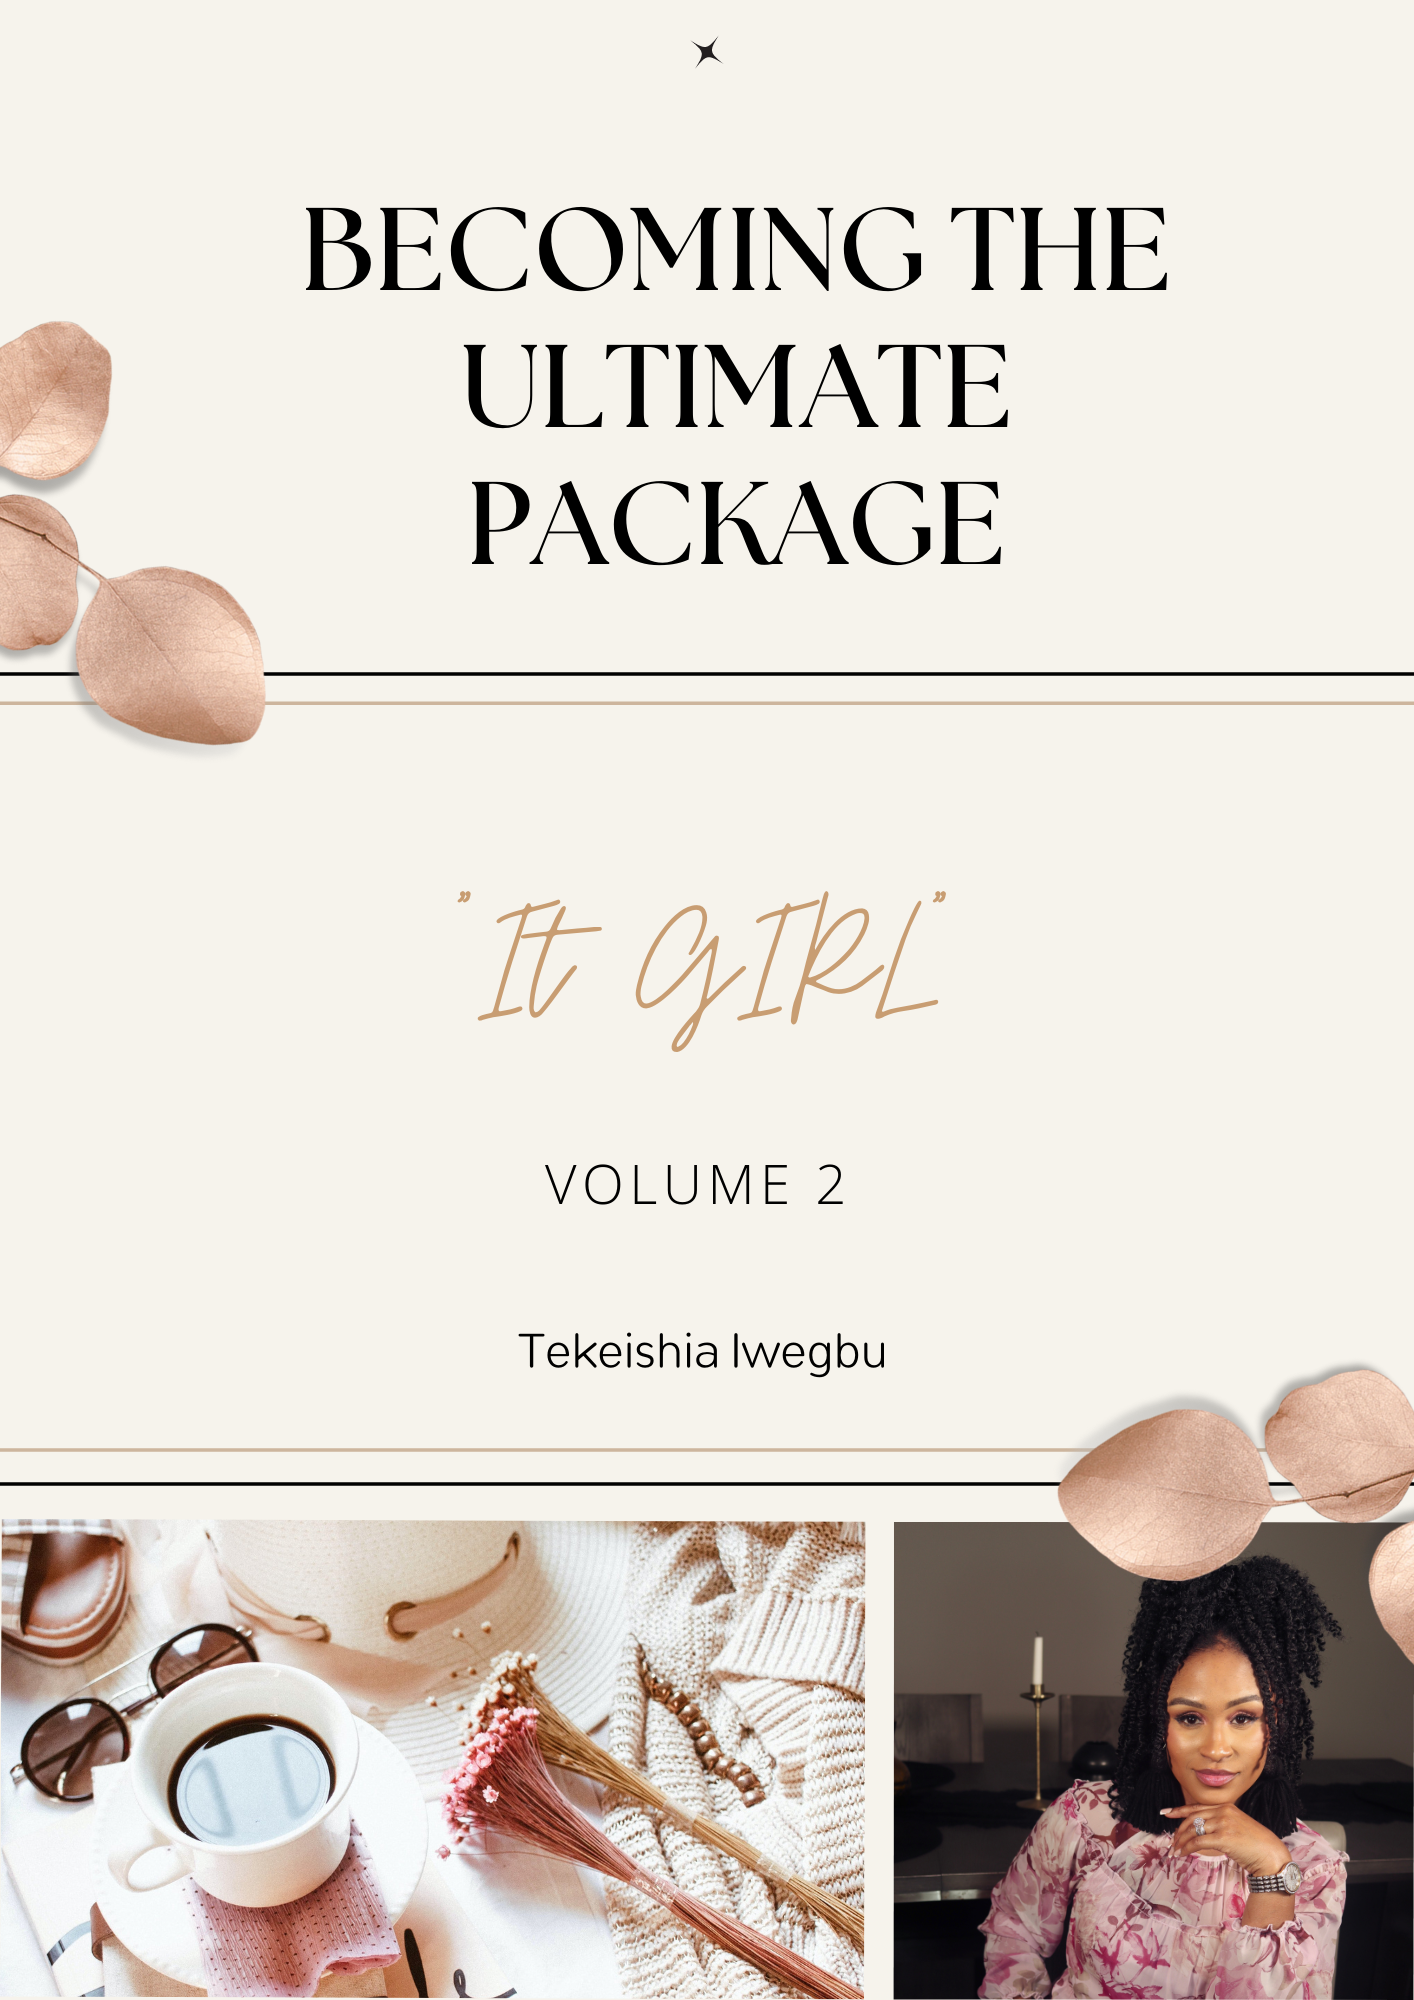 Becoming The Ultimate Package "IT GIRL" Vol. 2